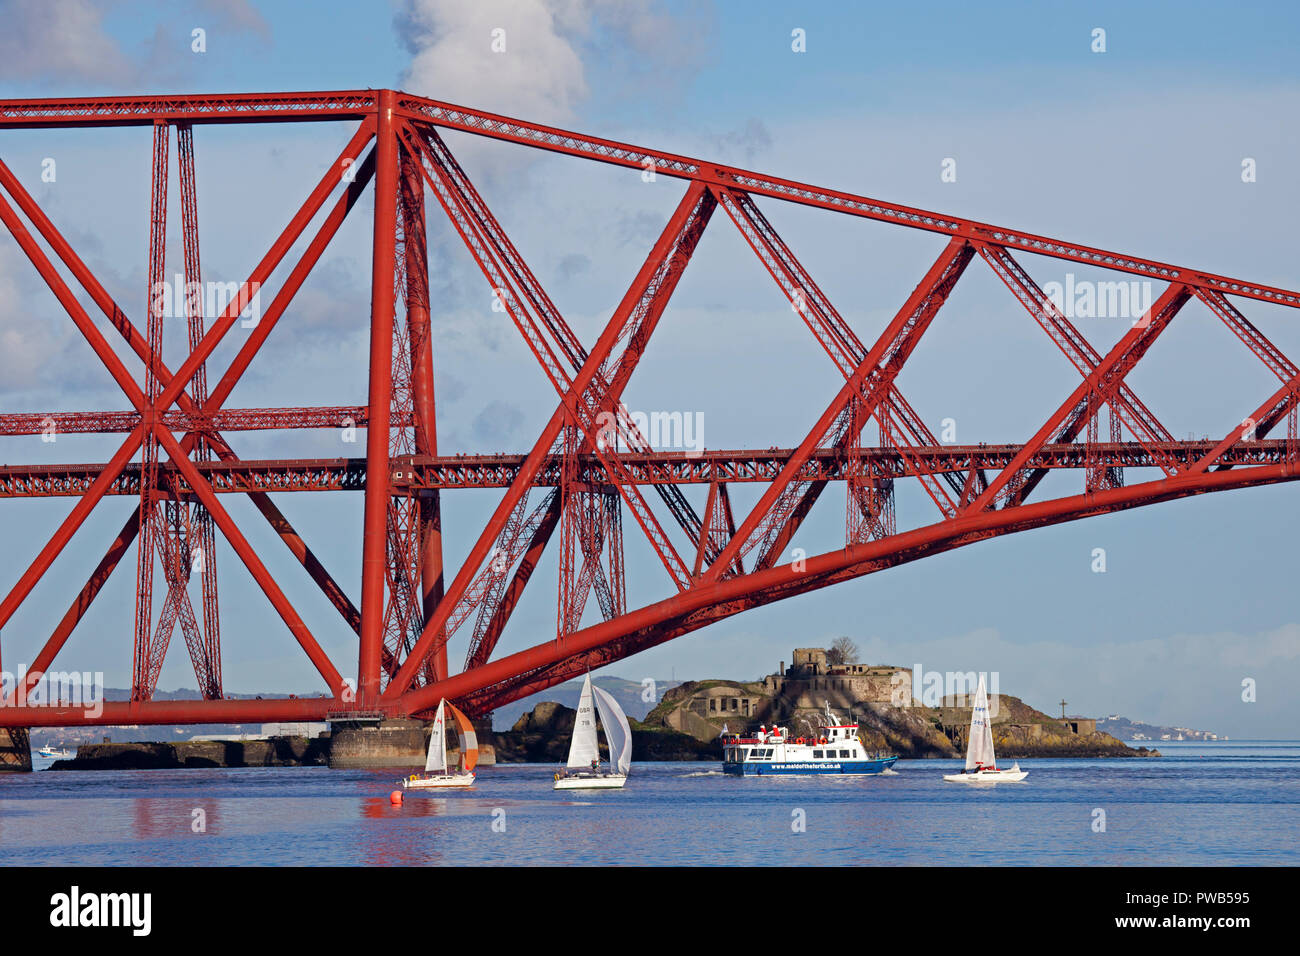 Edinburgh, Scotland, UK. 14 October 2018. UK weather, after a very cloudy cold morning the sun appeared in early afternoon and at 13 degrees it felt warm in the sunshine, not much wind to assist the crews of the small sail boats in the Forth estuary under the Forth Rail Bridge on a gorgeous afternoon for the sailing. Stock Photo